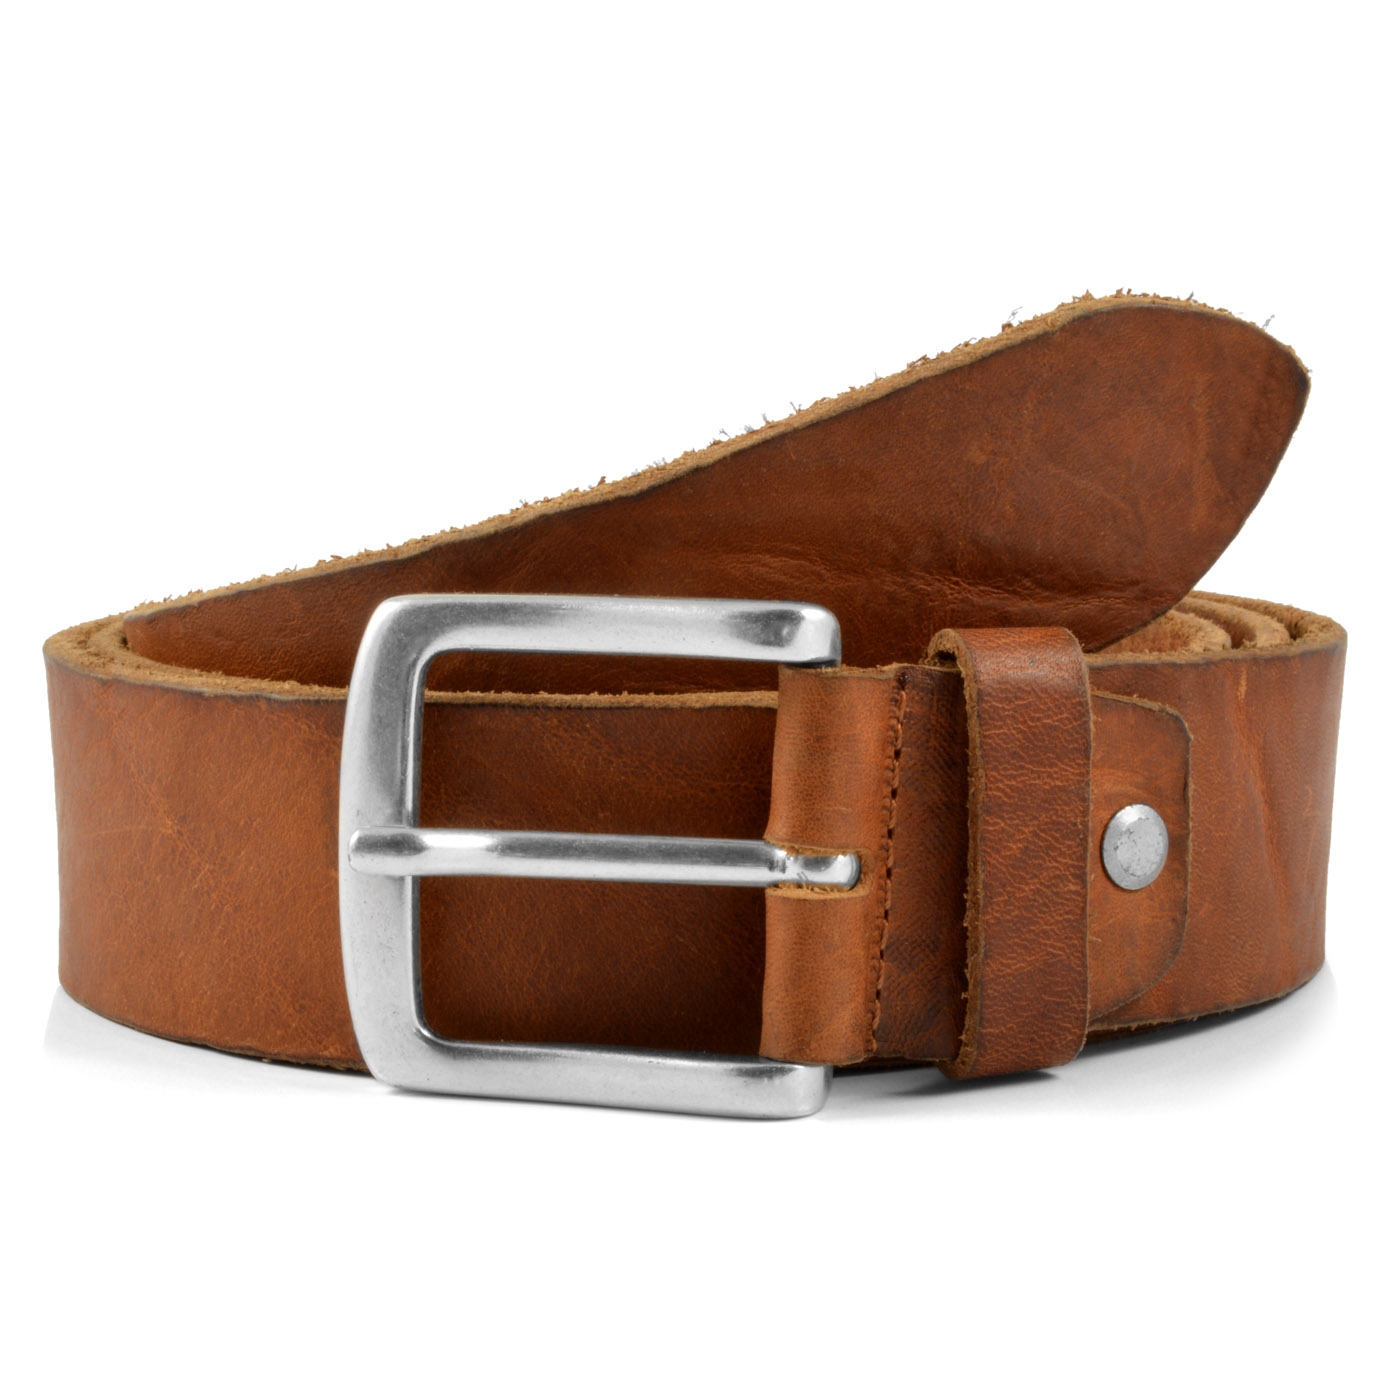 Rustic Washed Cognac Leather Belt | BSWK | Free shipping